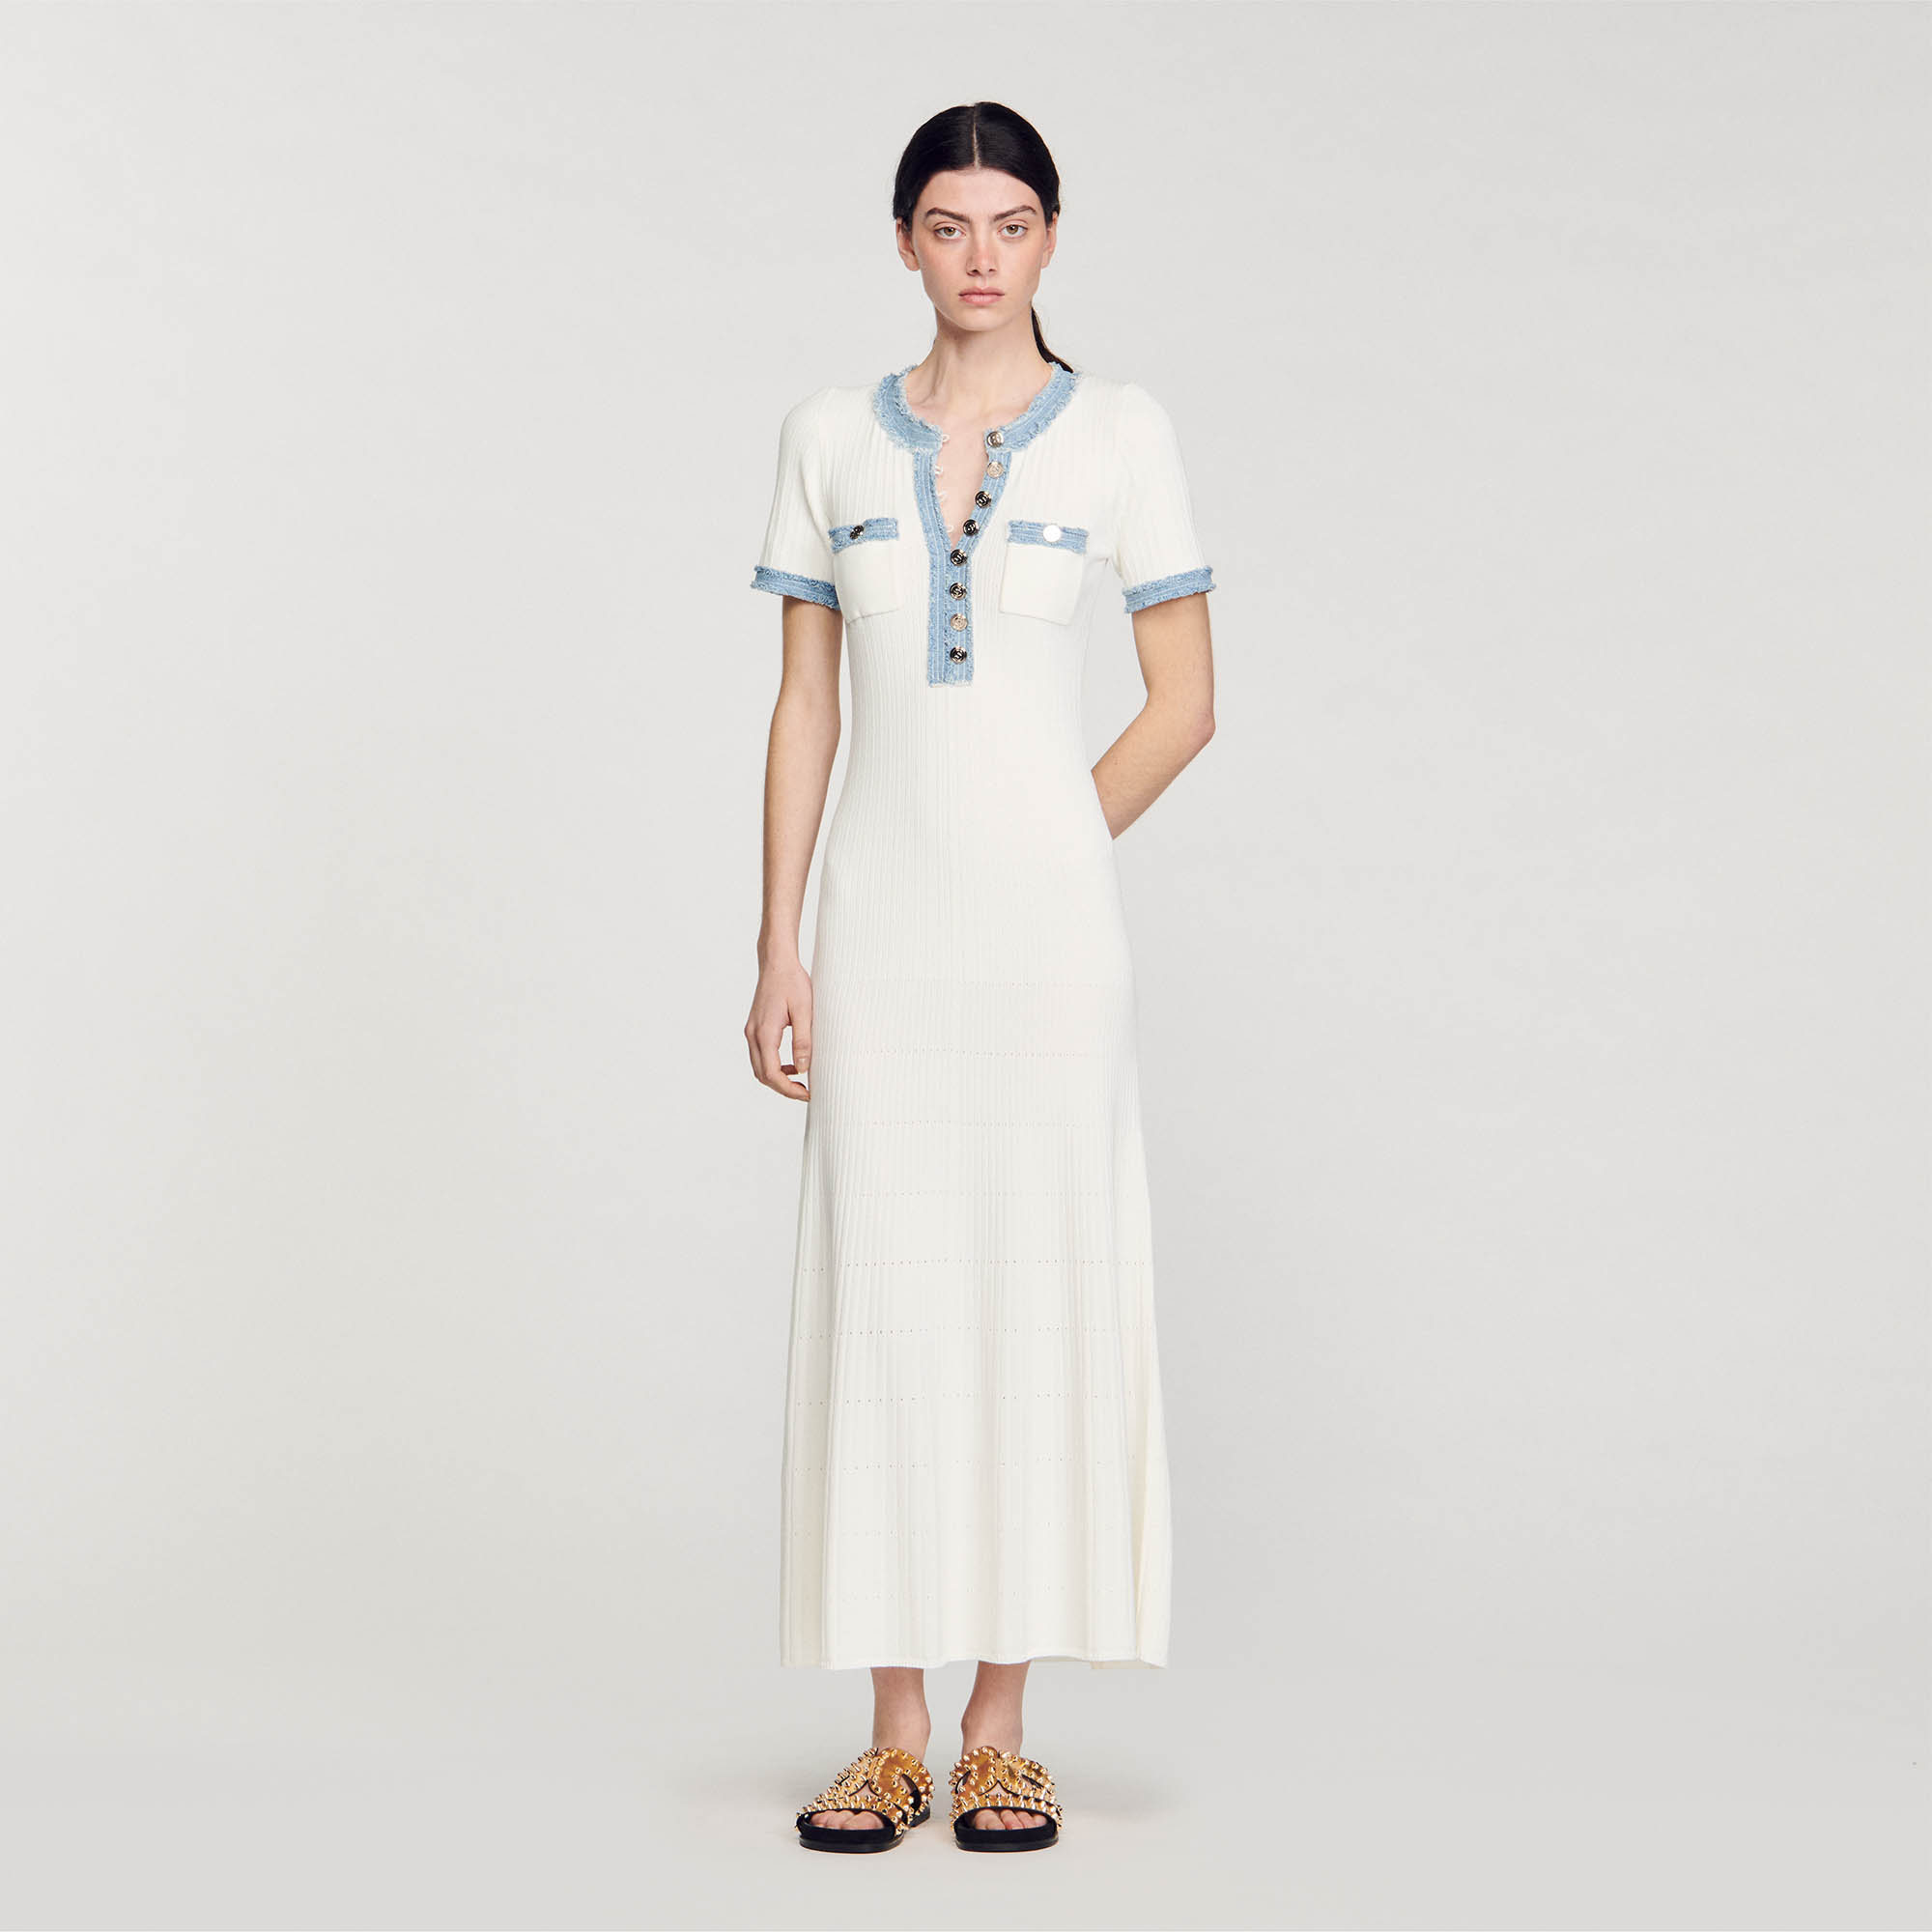 Sandro viscose Midi dress in decorative knit with frayed denim inserts, a round button-down collar, short sleeves and two patch pockets at the chest